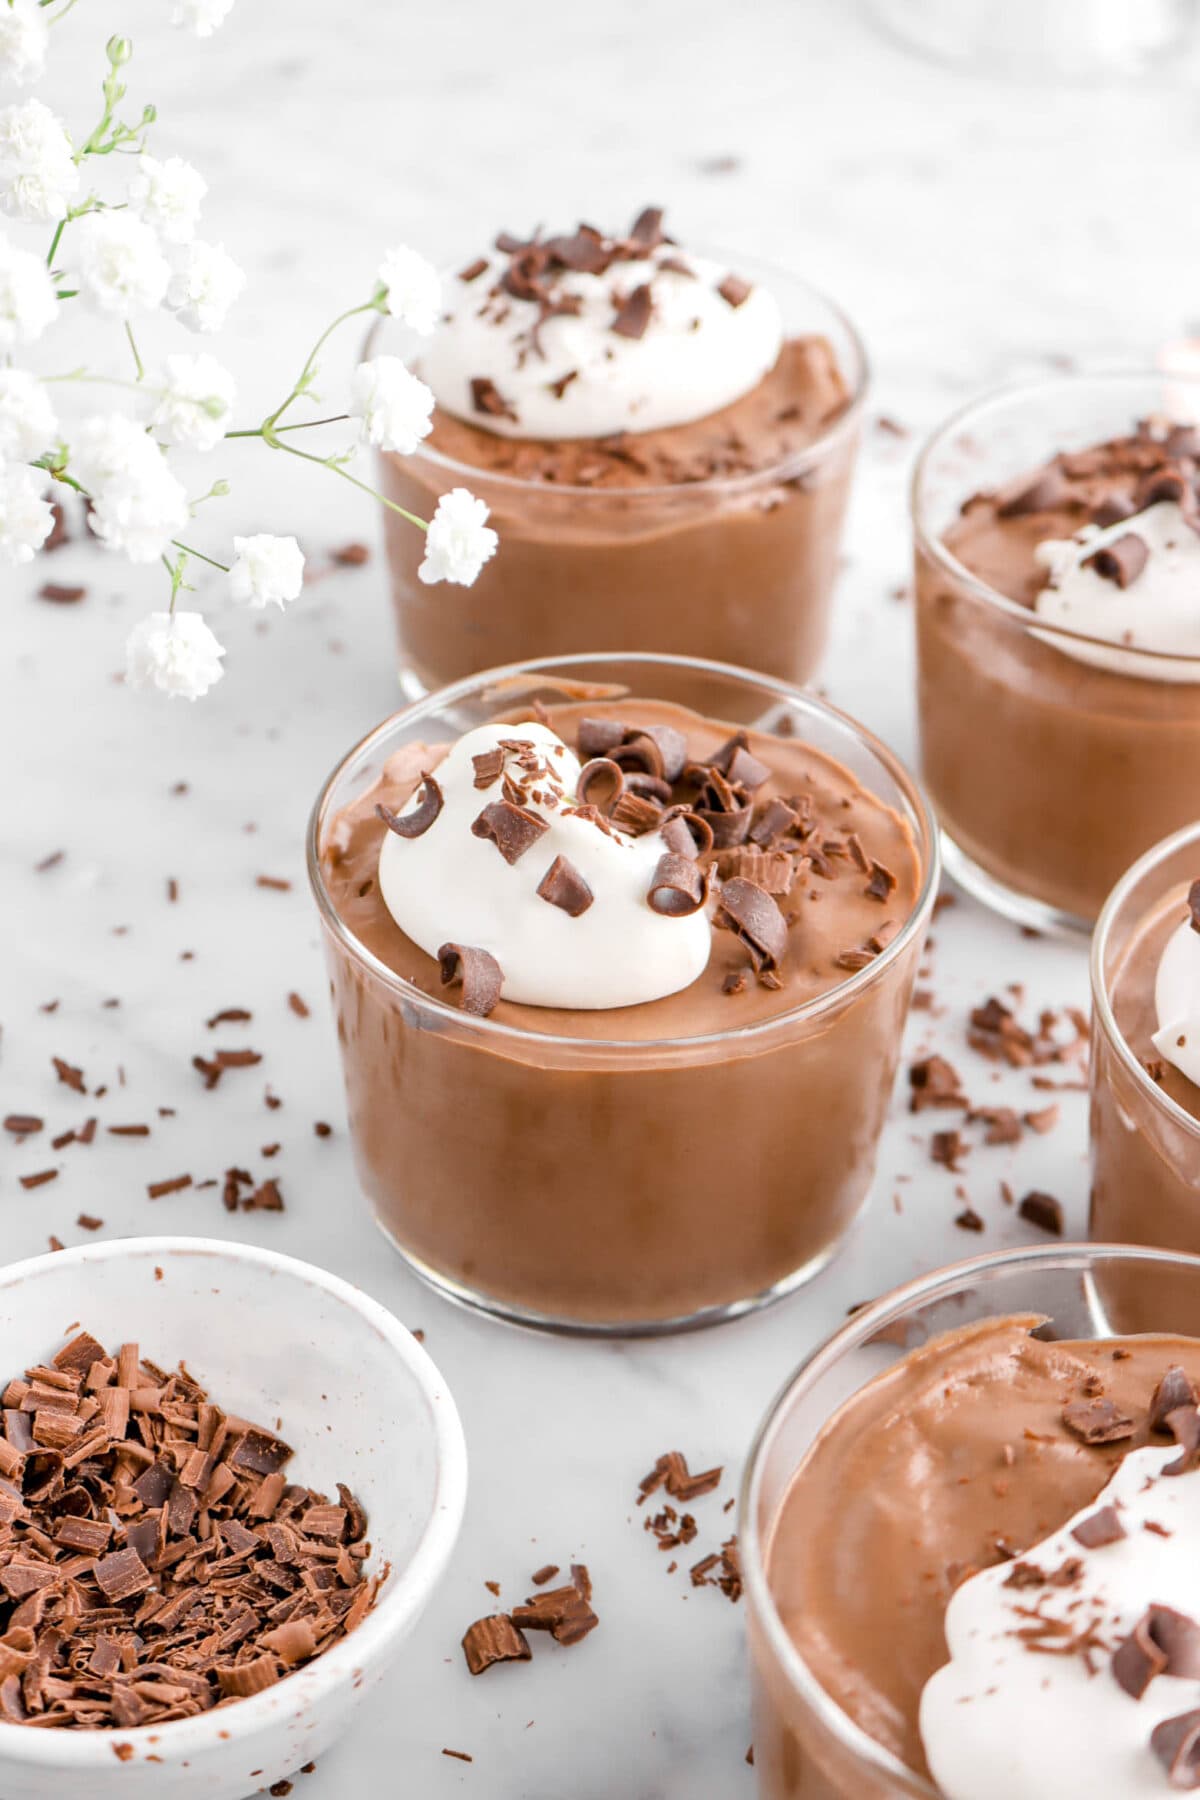 angled close up of glass of chocolate mousse with chocolate curls and white flowers